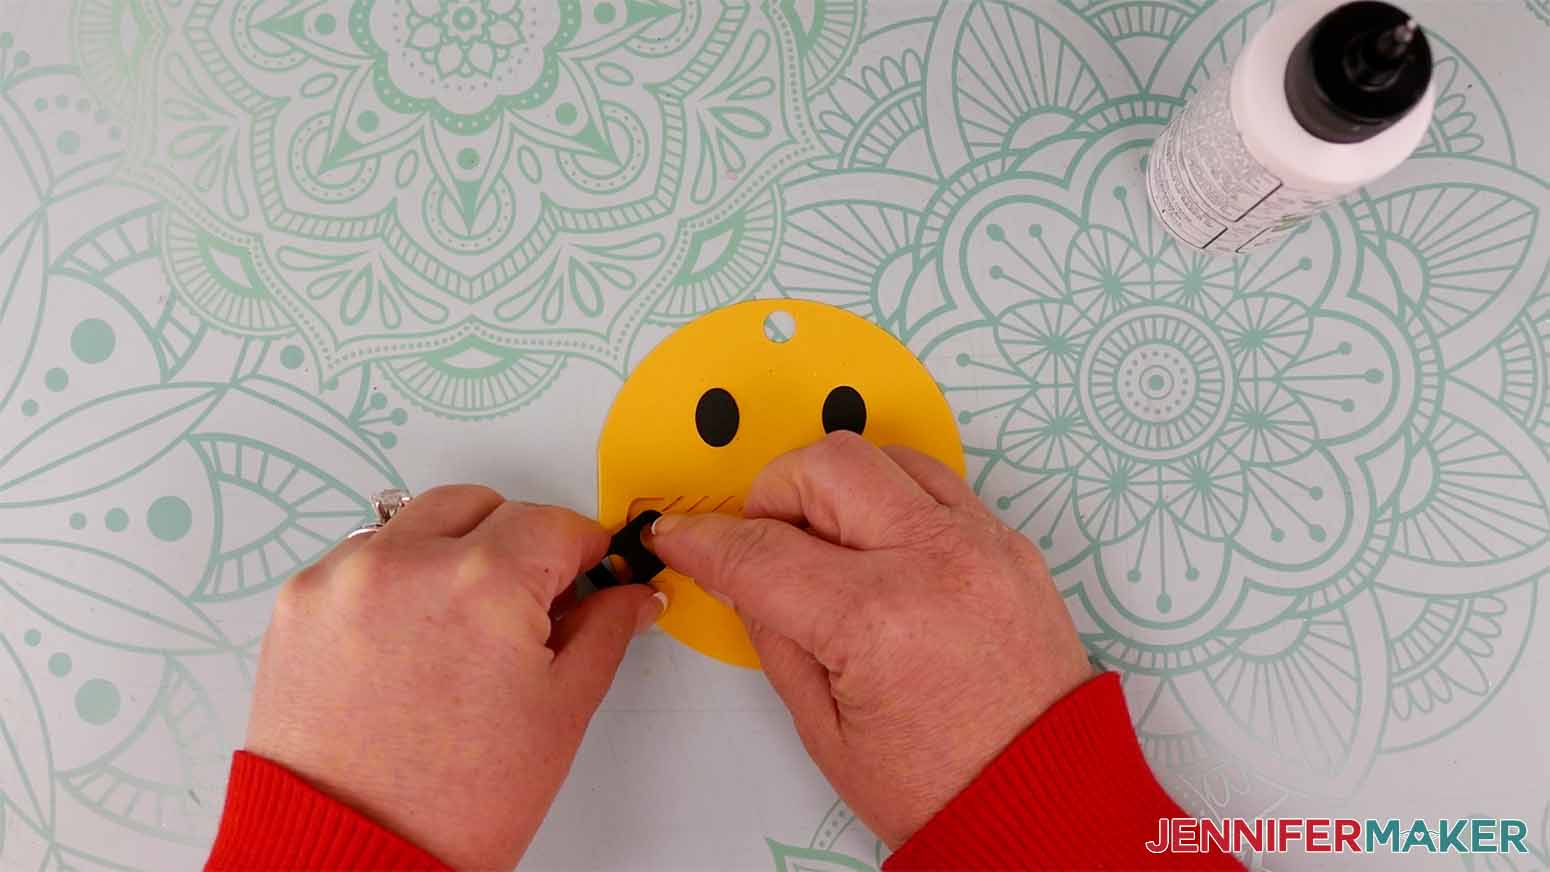 Use craft glue to attach the eyes and zipper pieces to the front of the emoji gift tag.